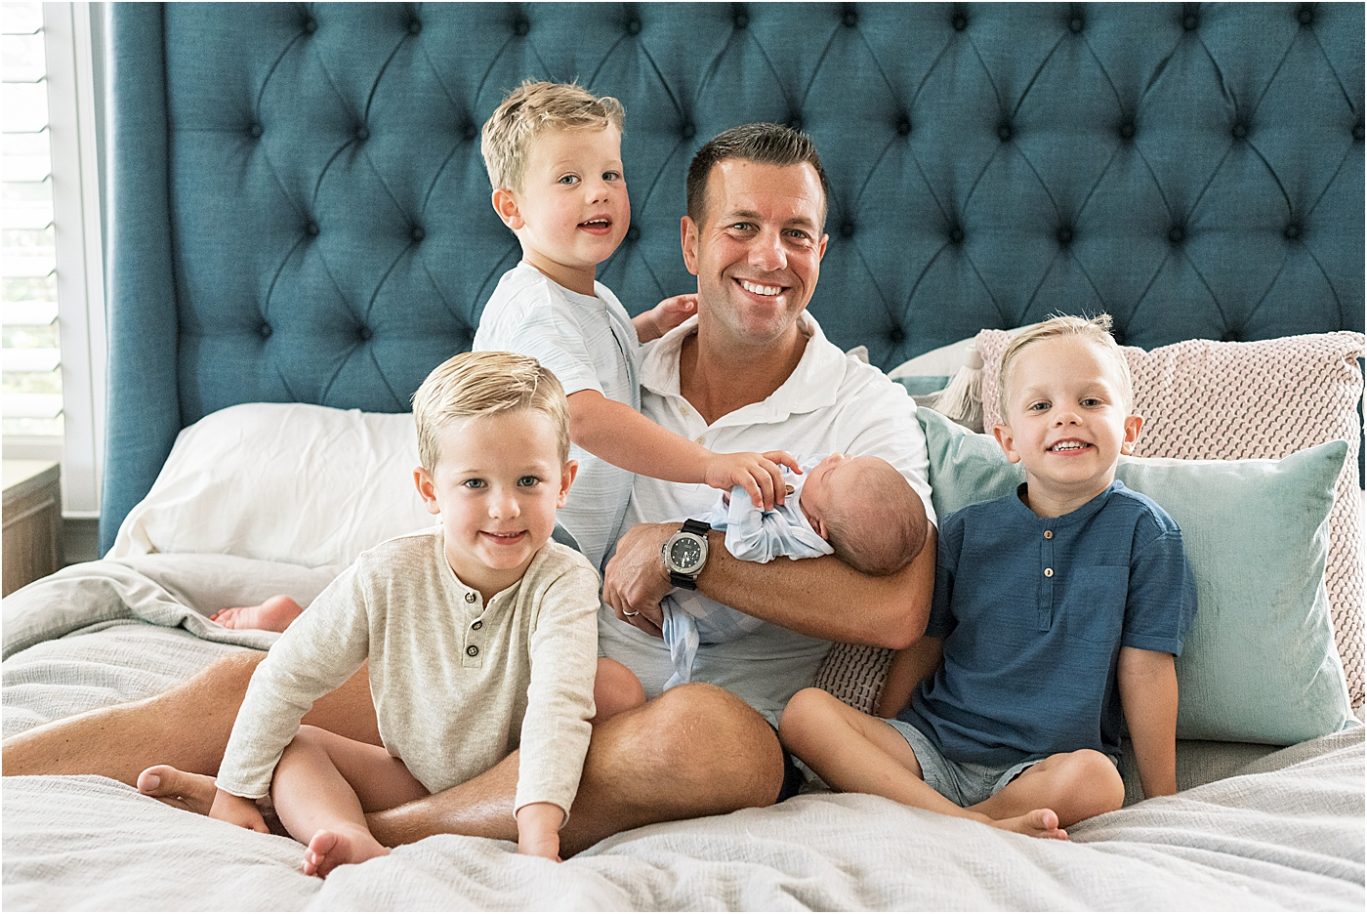 Dad and his four boys sitting together on bed. Photo by Lindsay Konopa Photography.